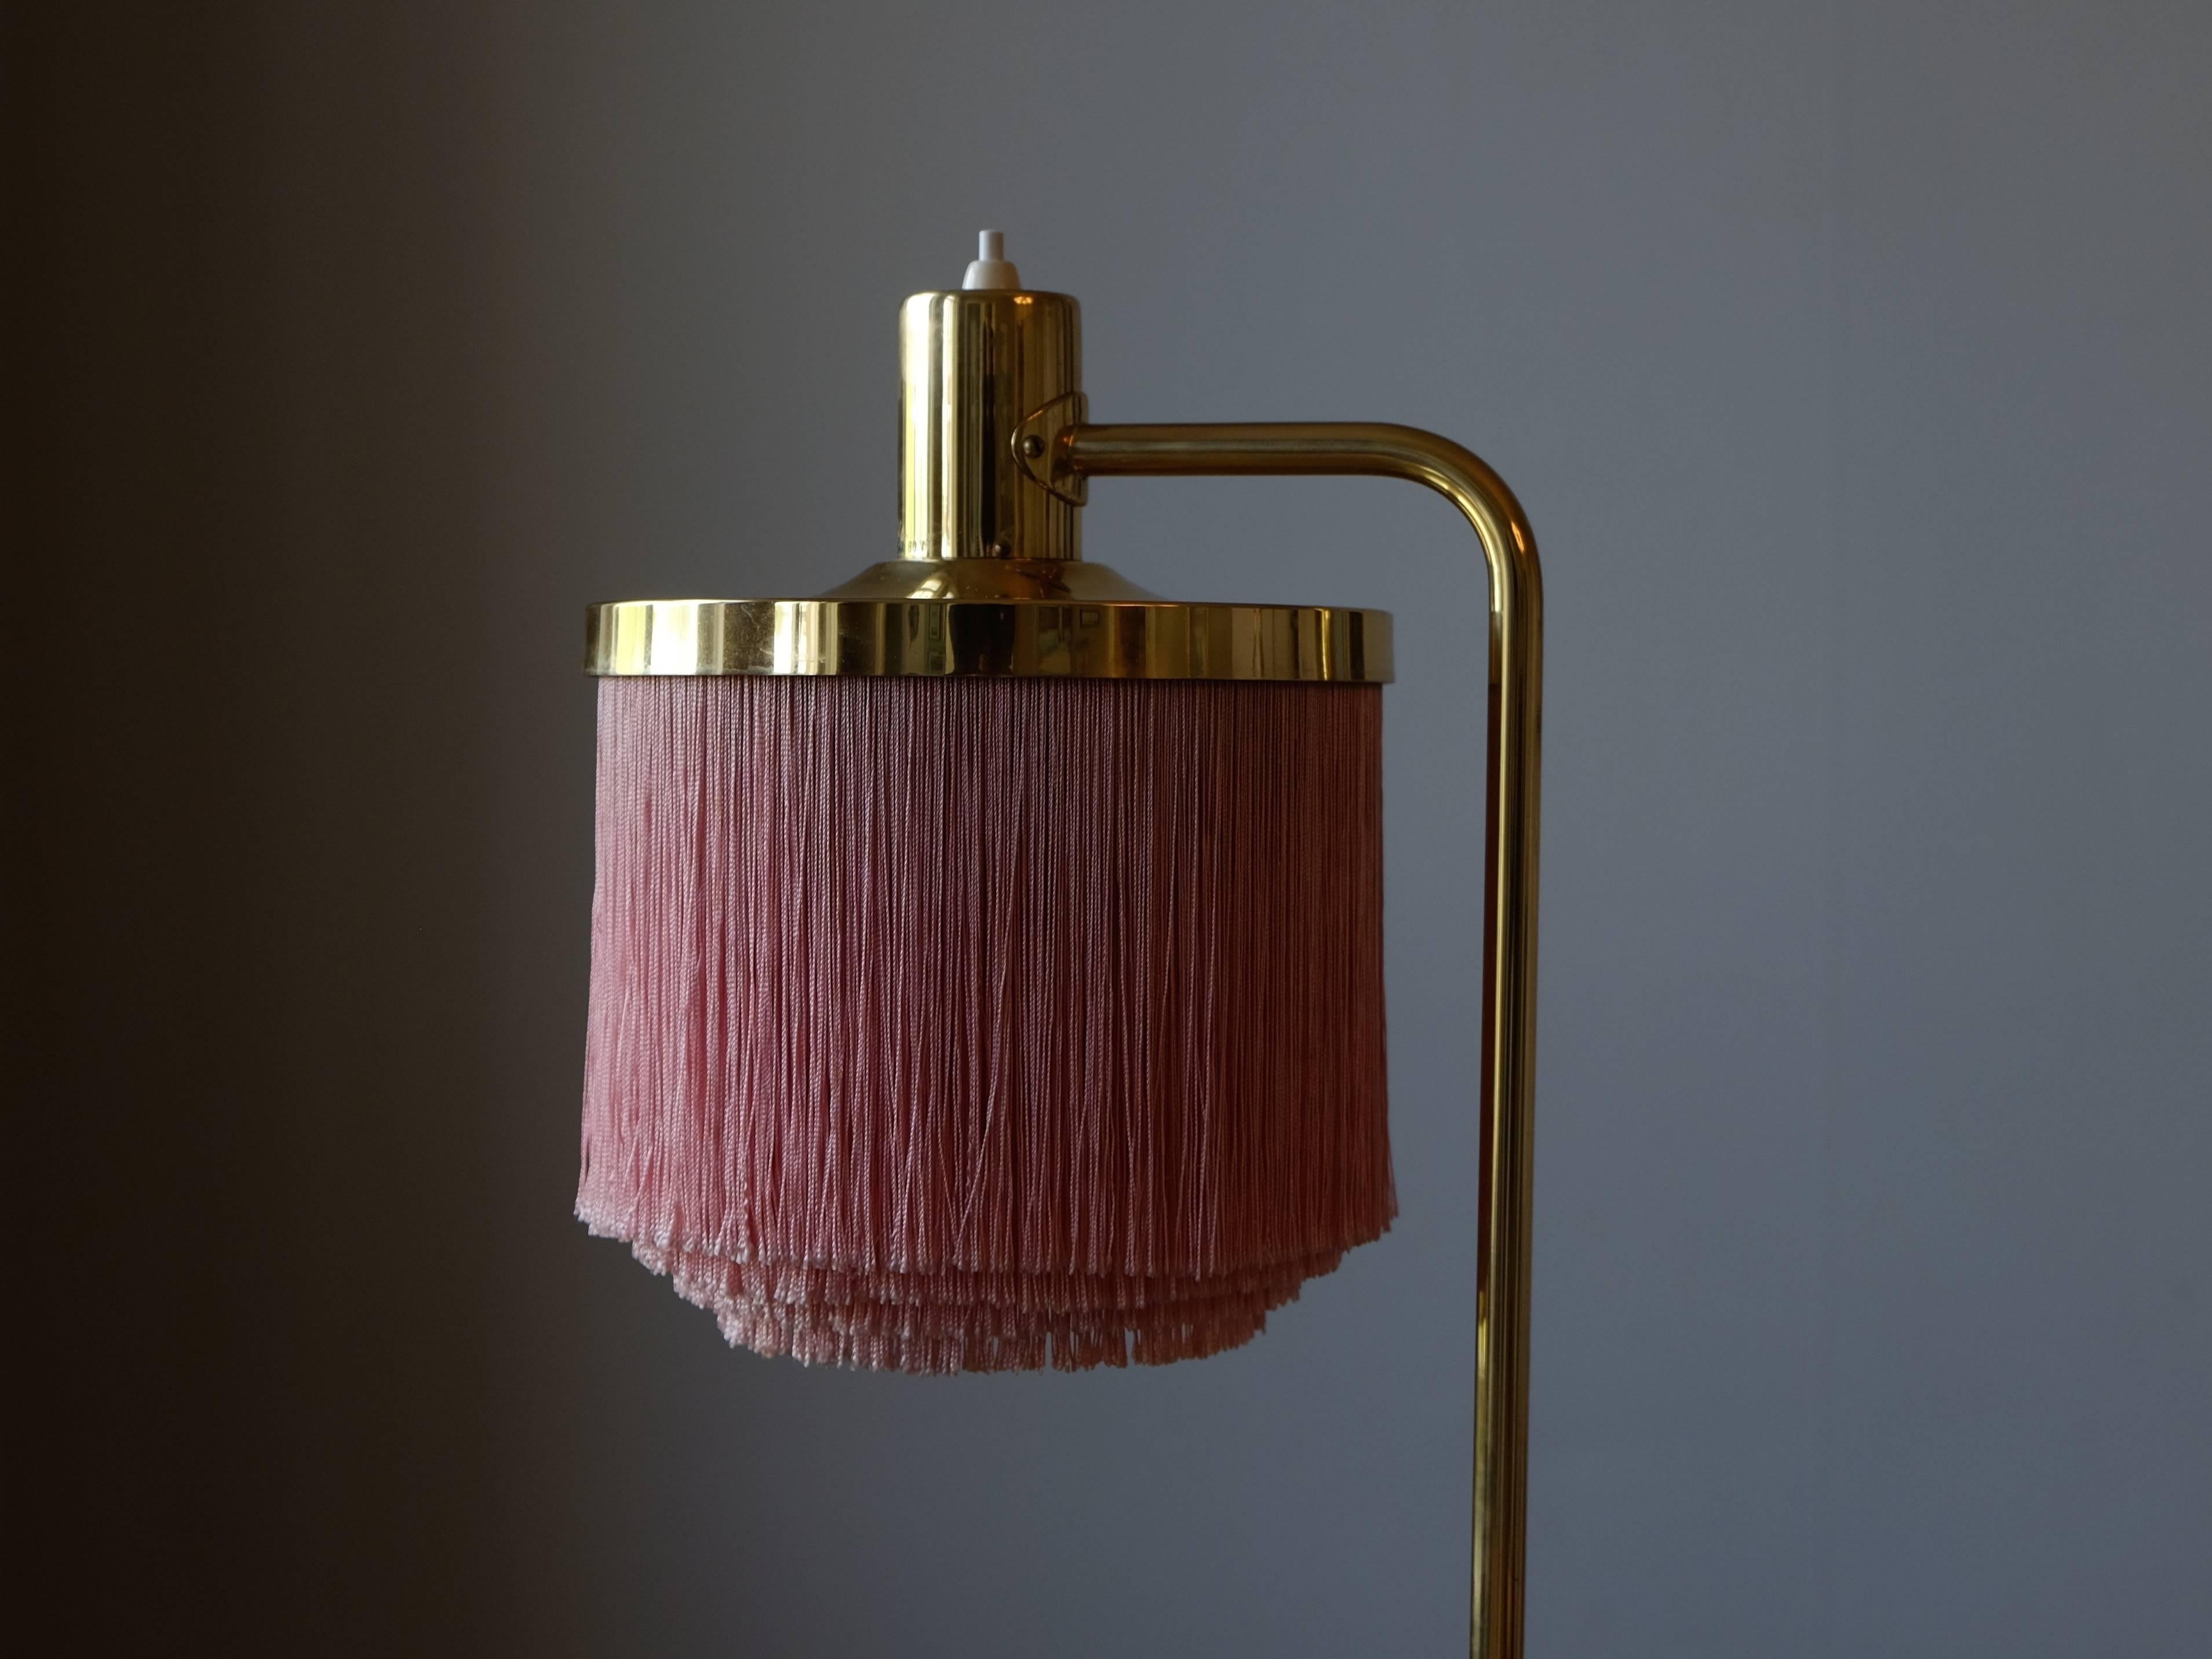 Brass table lamp produced by Hans-Agne Jakobsson in Markaryd, Sweden.
New wiring.